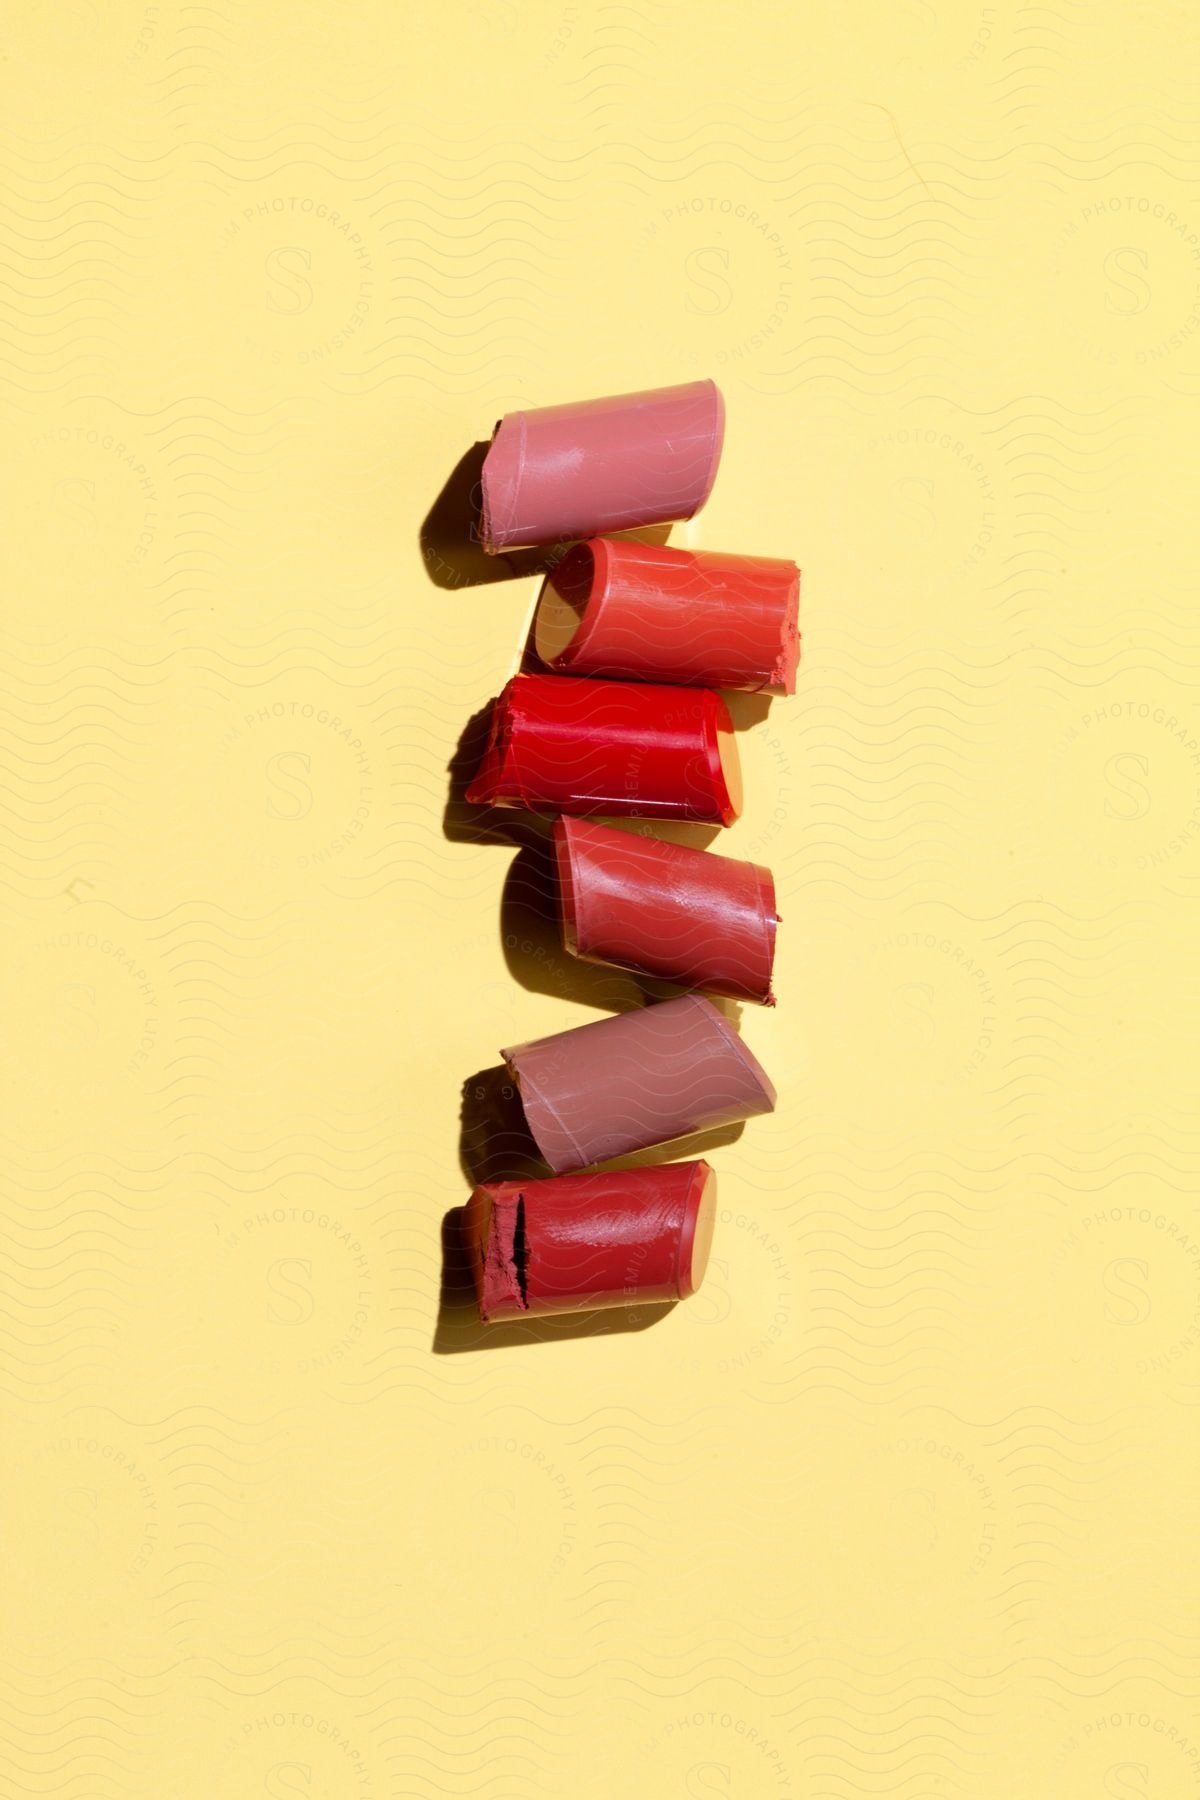 Pieces of broken lipstick, arranged on a bright yellow background. The lipsticks are in shades of red and pink, indicating a variety of colors.